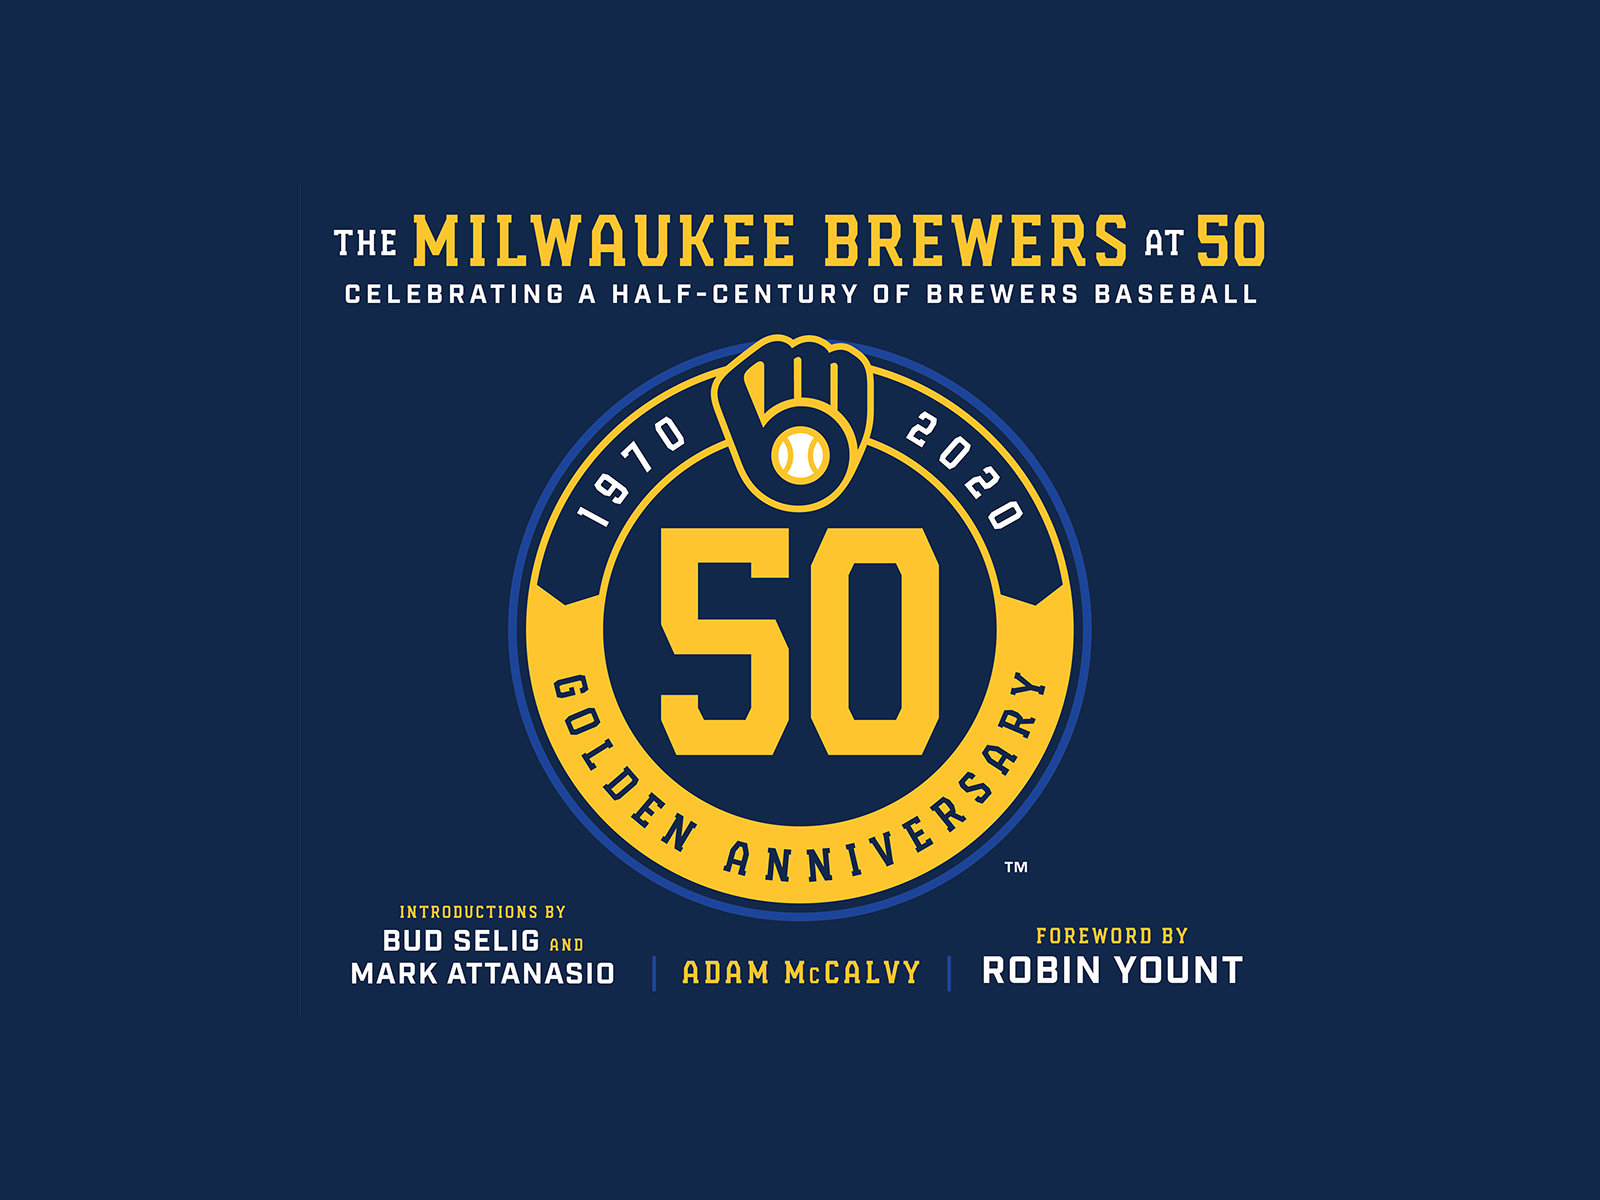 Celebrating 30th anniversary of the Milwaukee Brewers Famous